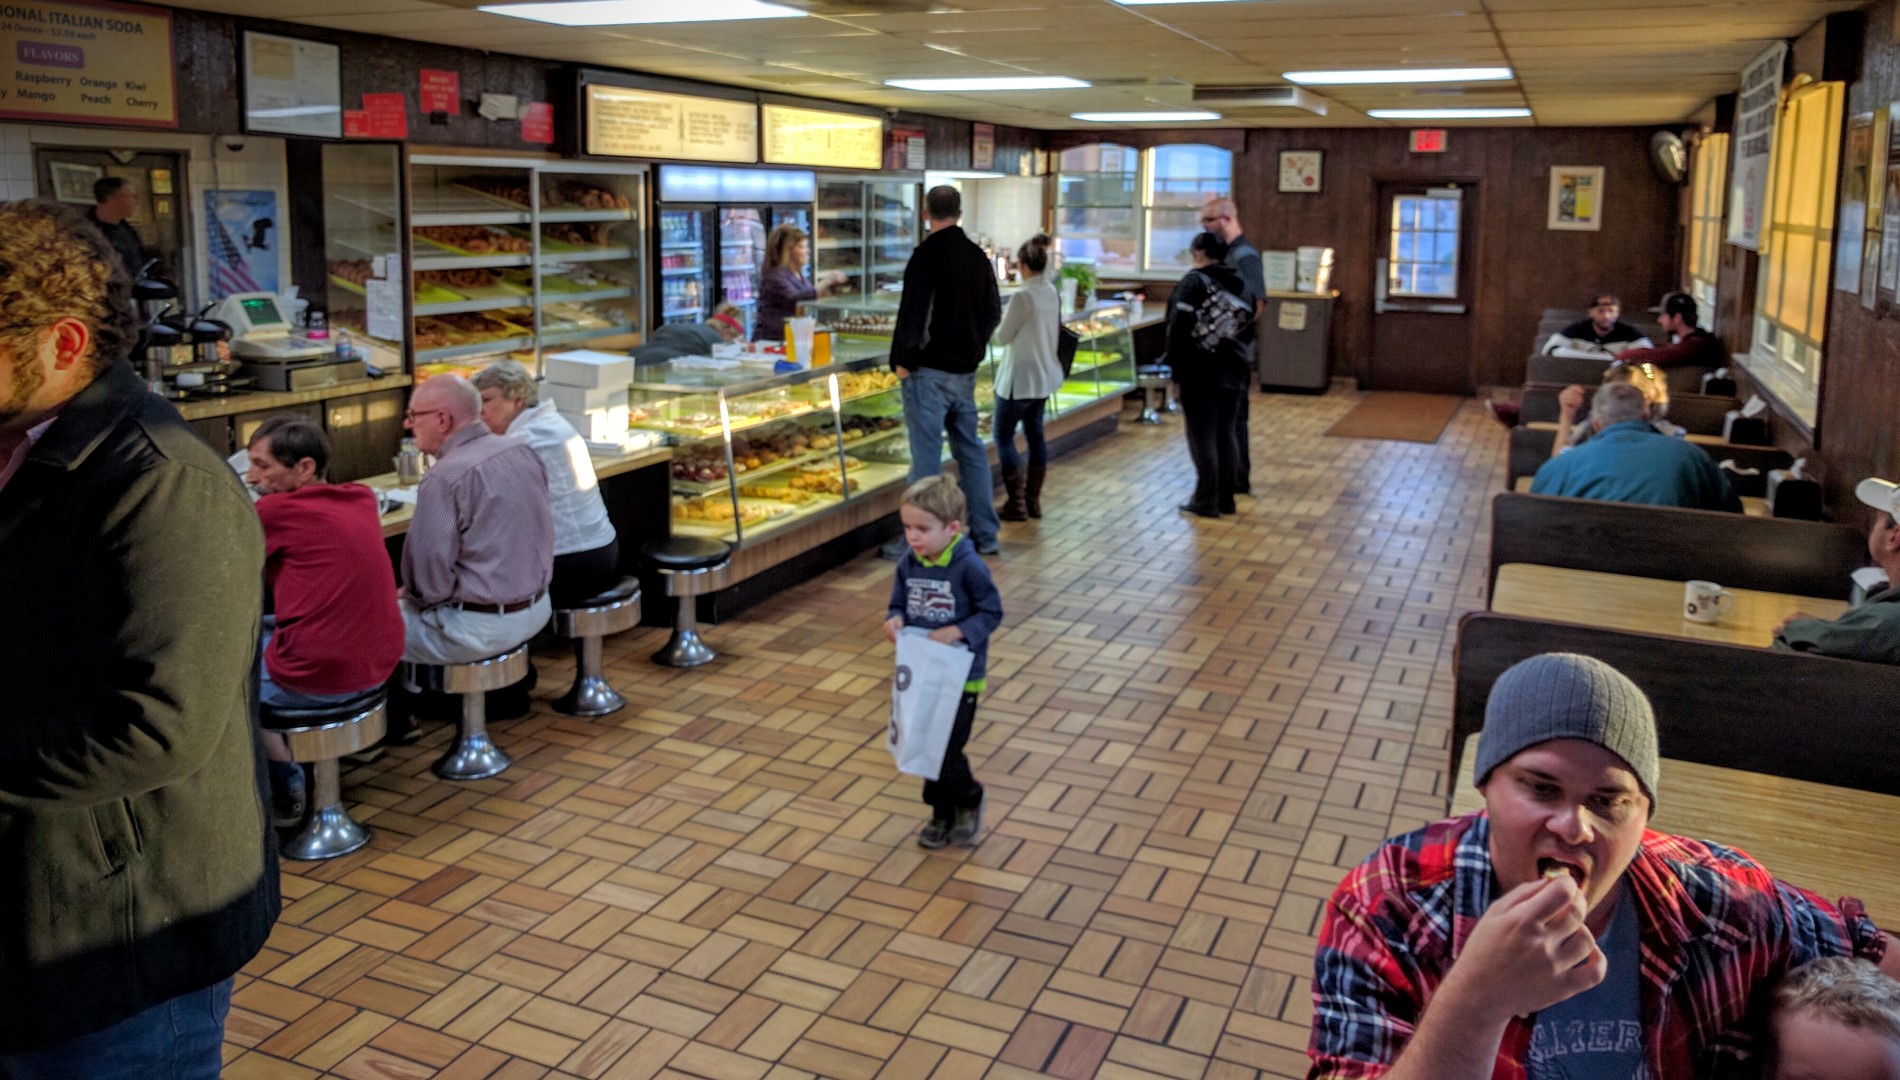 Bill's Donuts is always busy